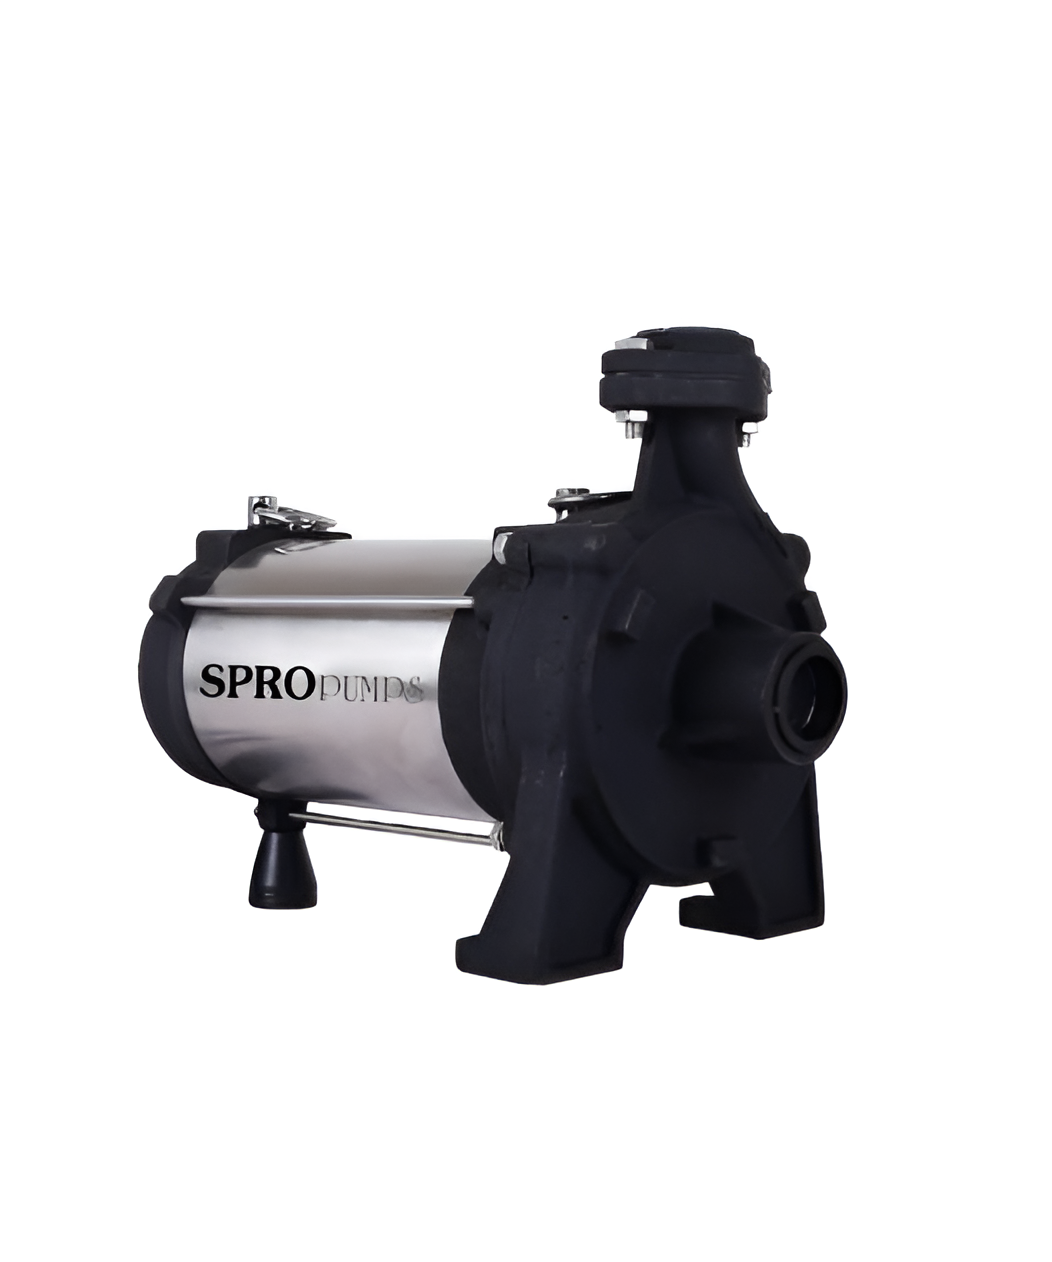 S PRO PUMPS   Keralas Leading Water Pump Manufacturer and  - Kerala - Thrissur ID1551144 2